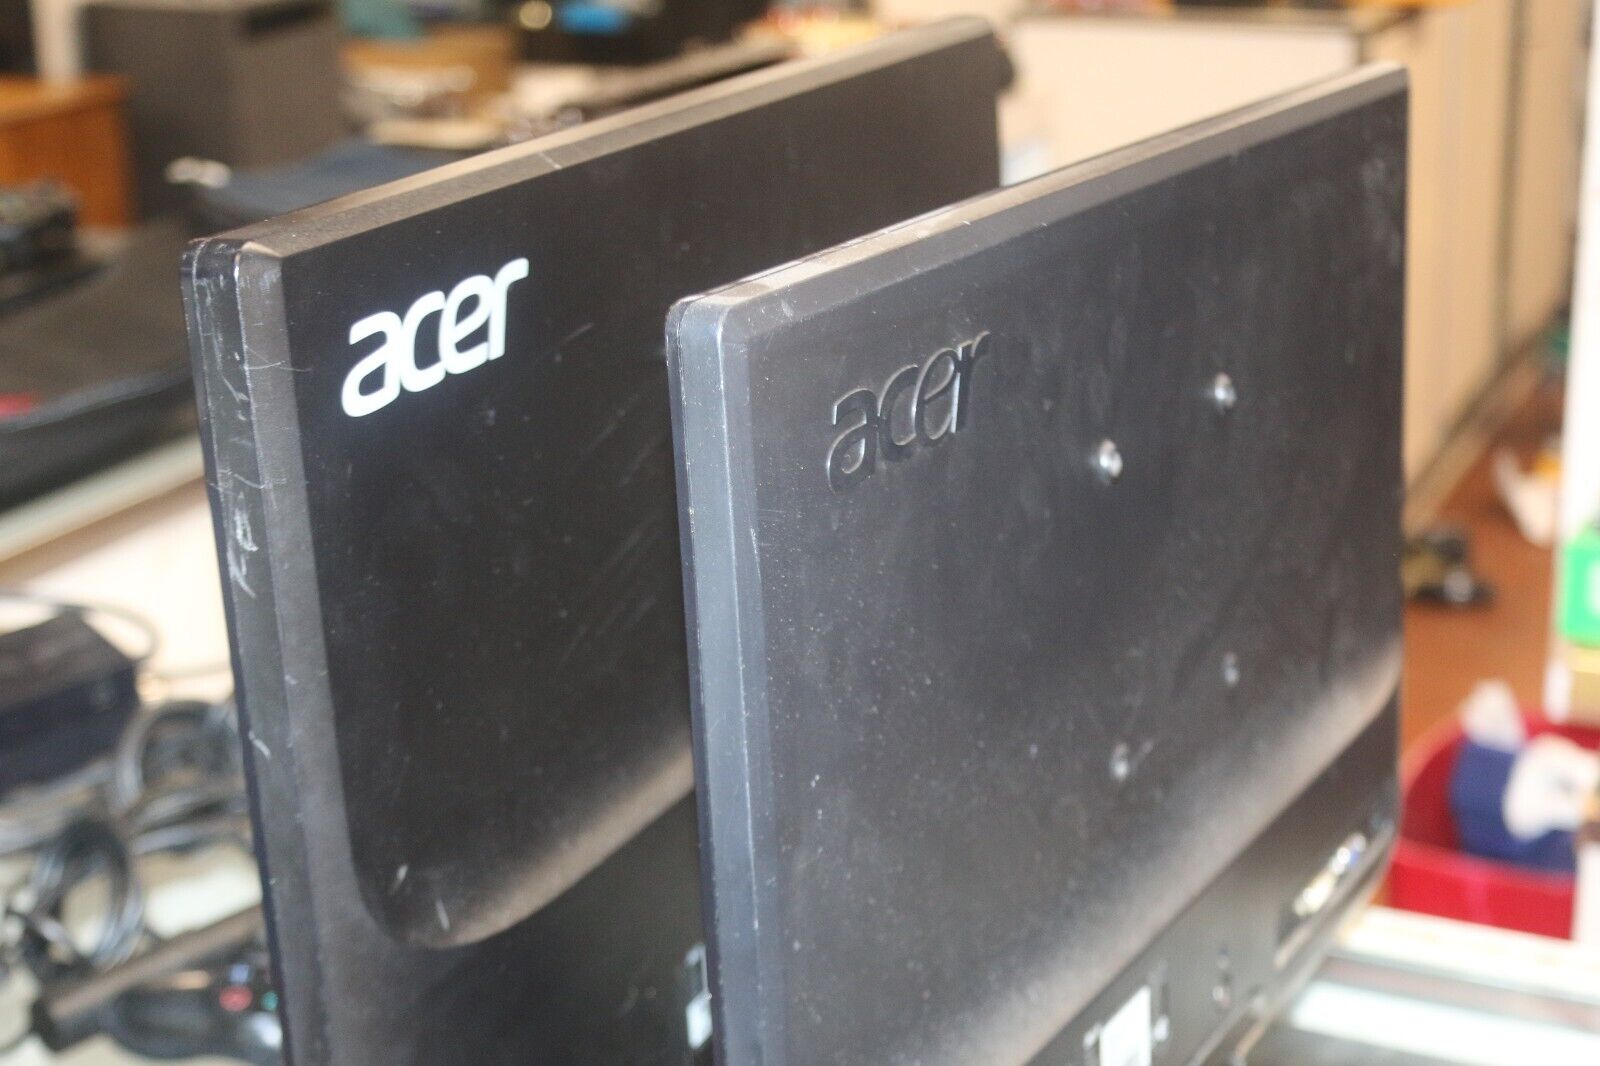 LOT OF 2 COMPUTER MONITORS (Acer S231HL & Acer G246HL) For PARTS(no powersupply)